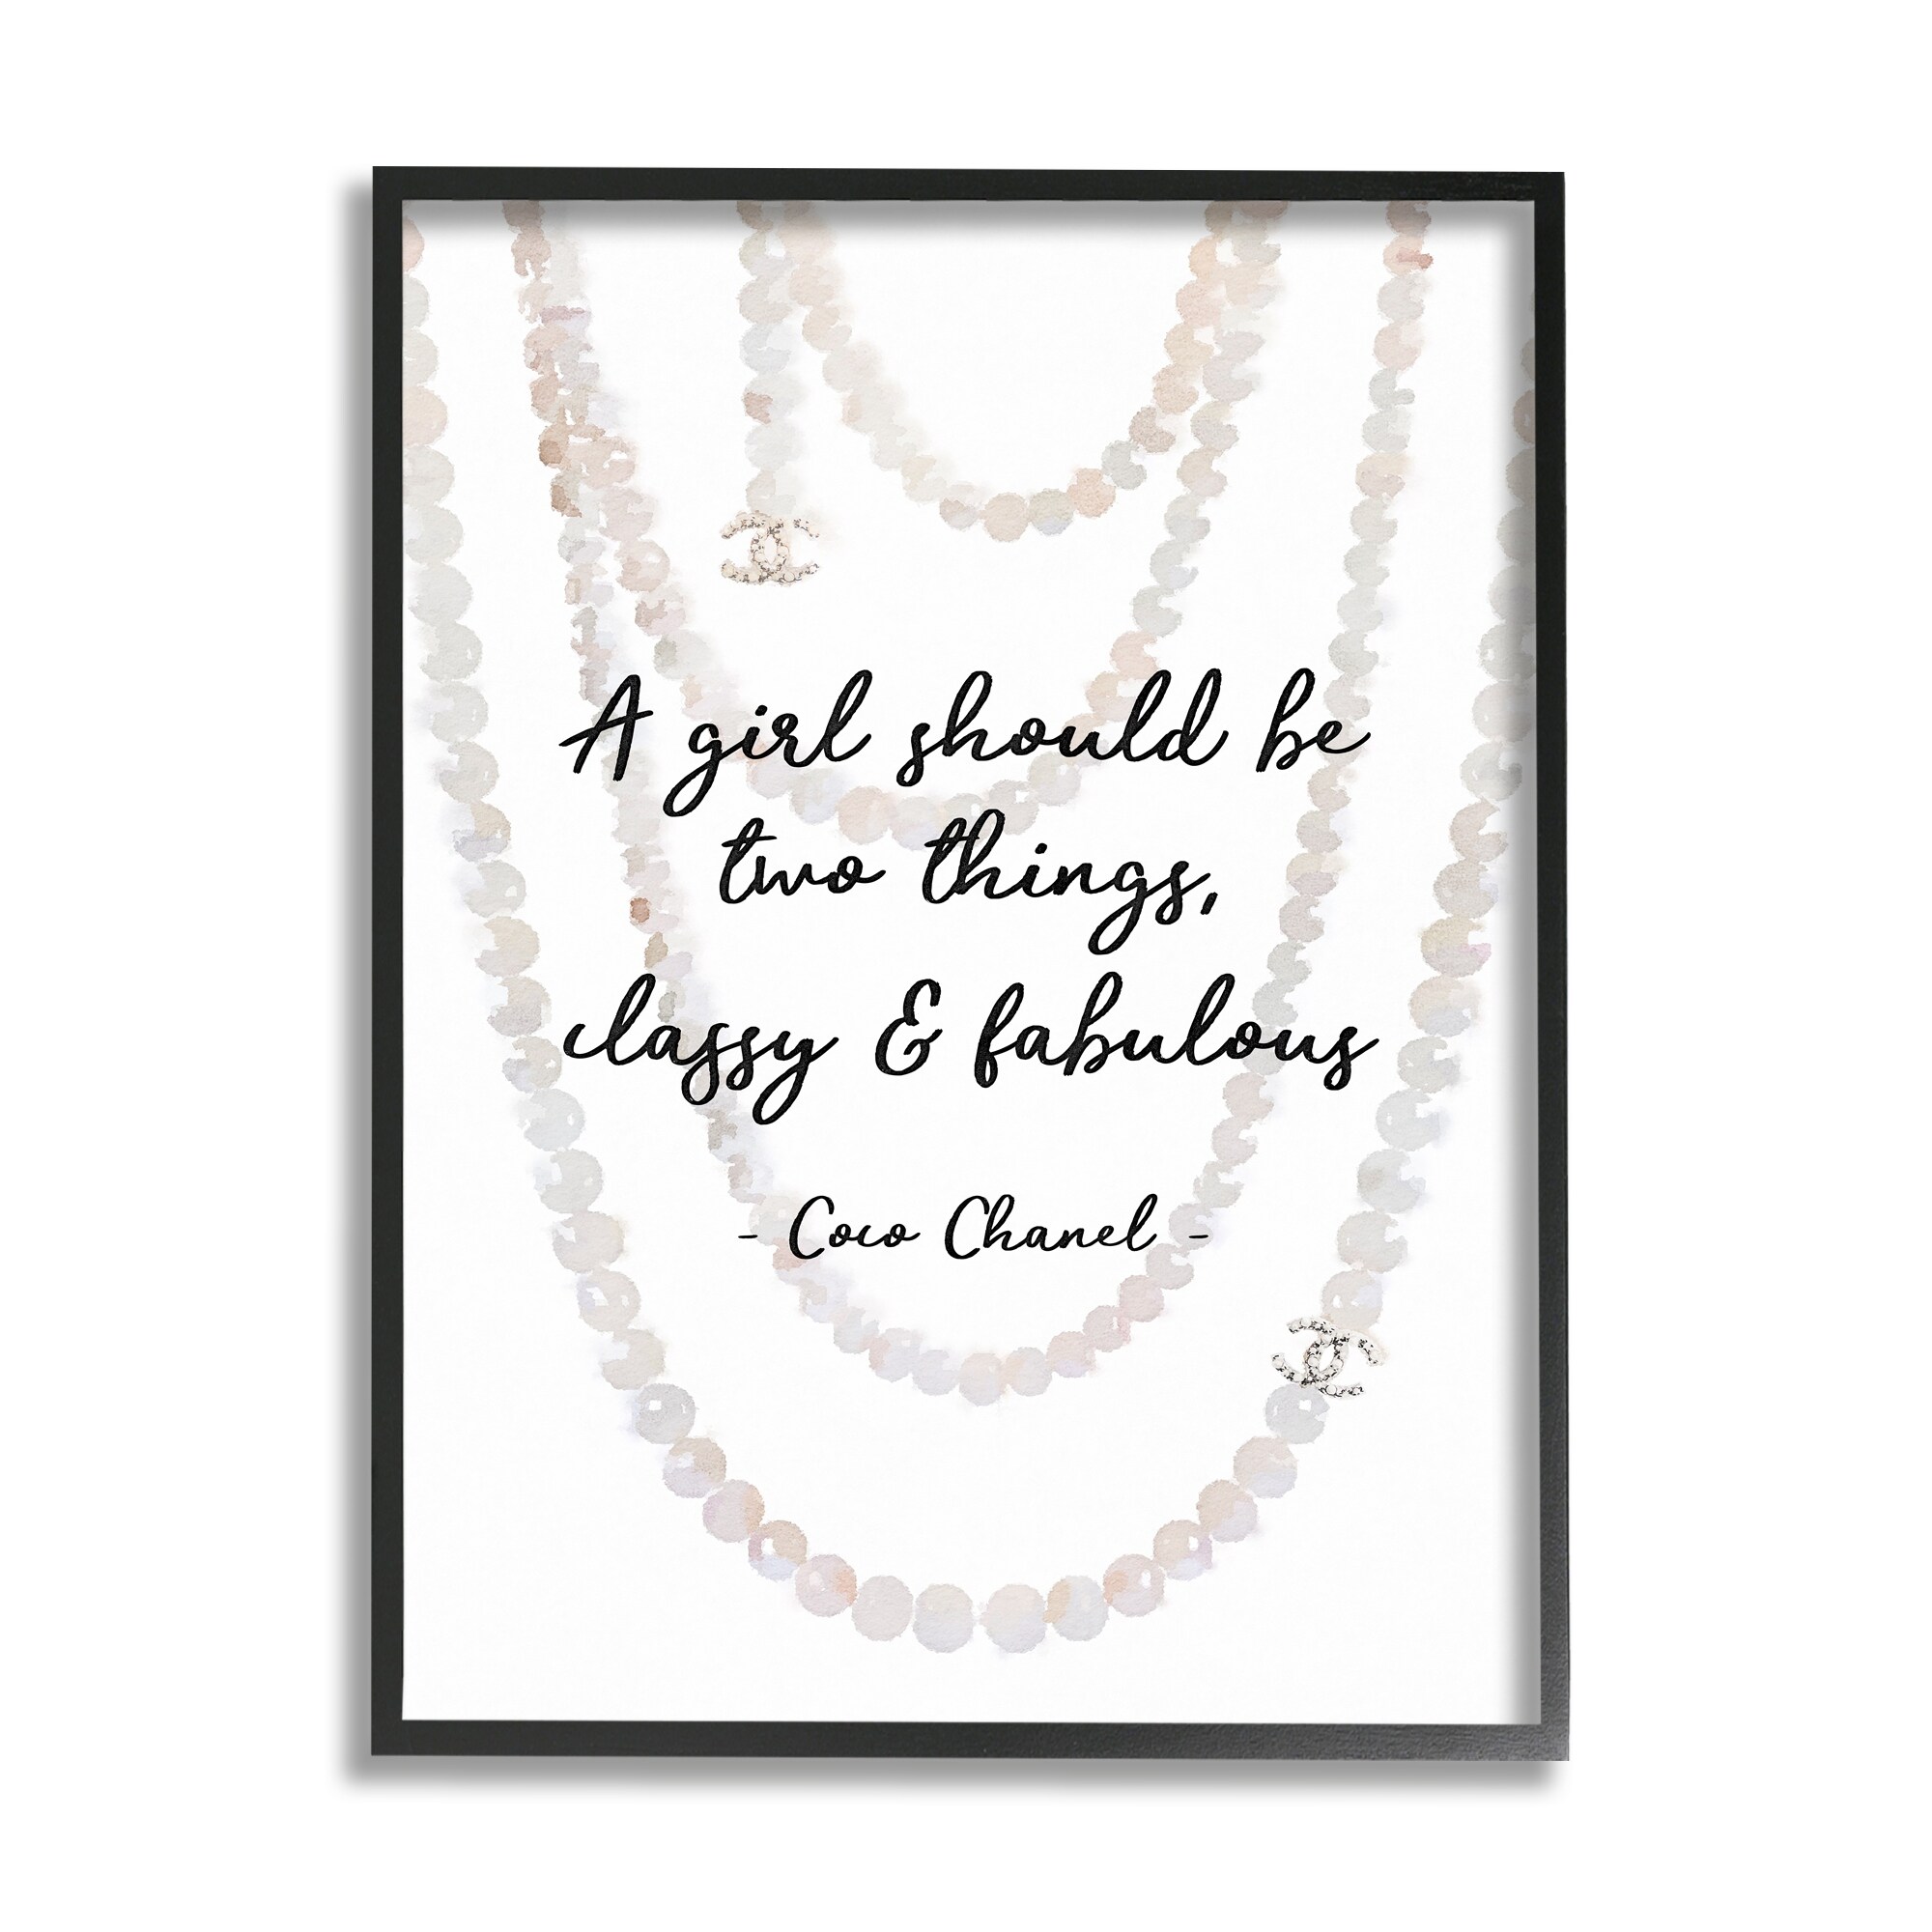 Get the best deals on coco chanel art when you shop the largest